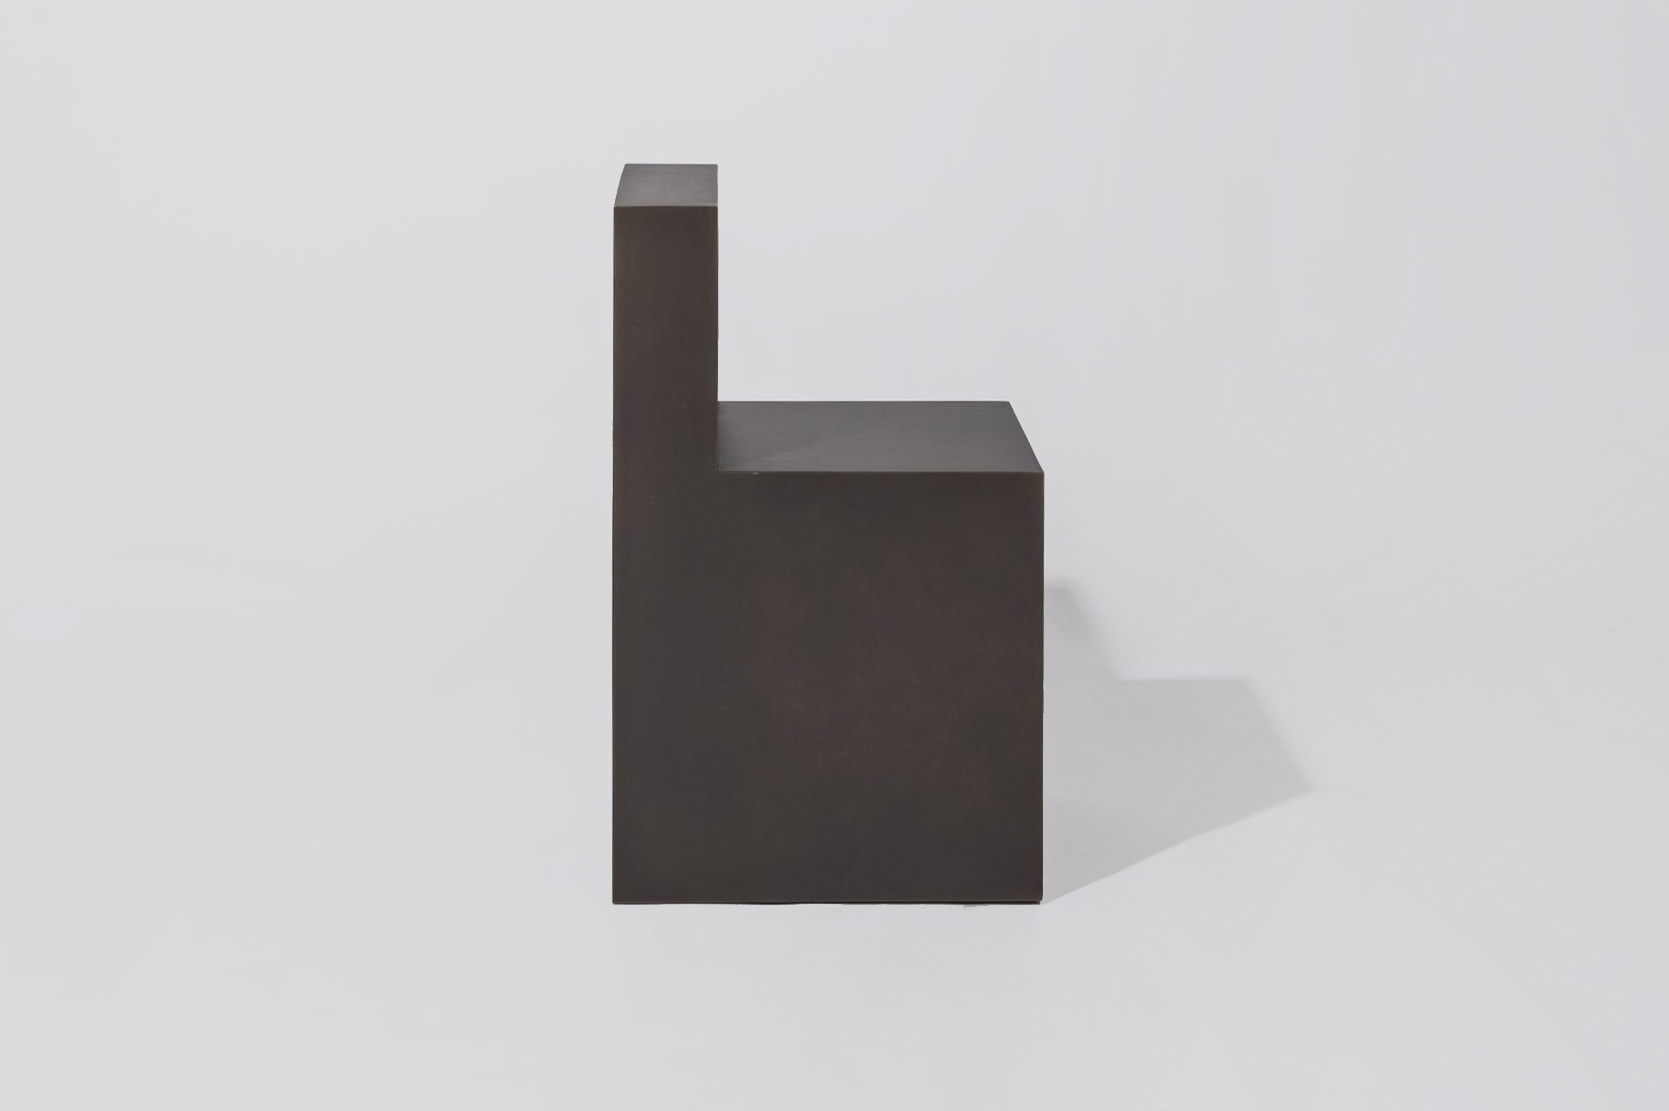 Minimalist and sculptural GV chair designed by Jonathan Nesci | Aesence